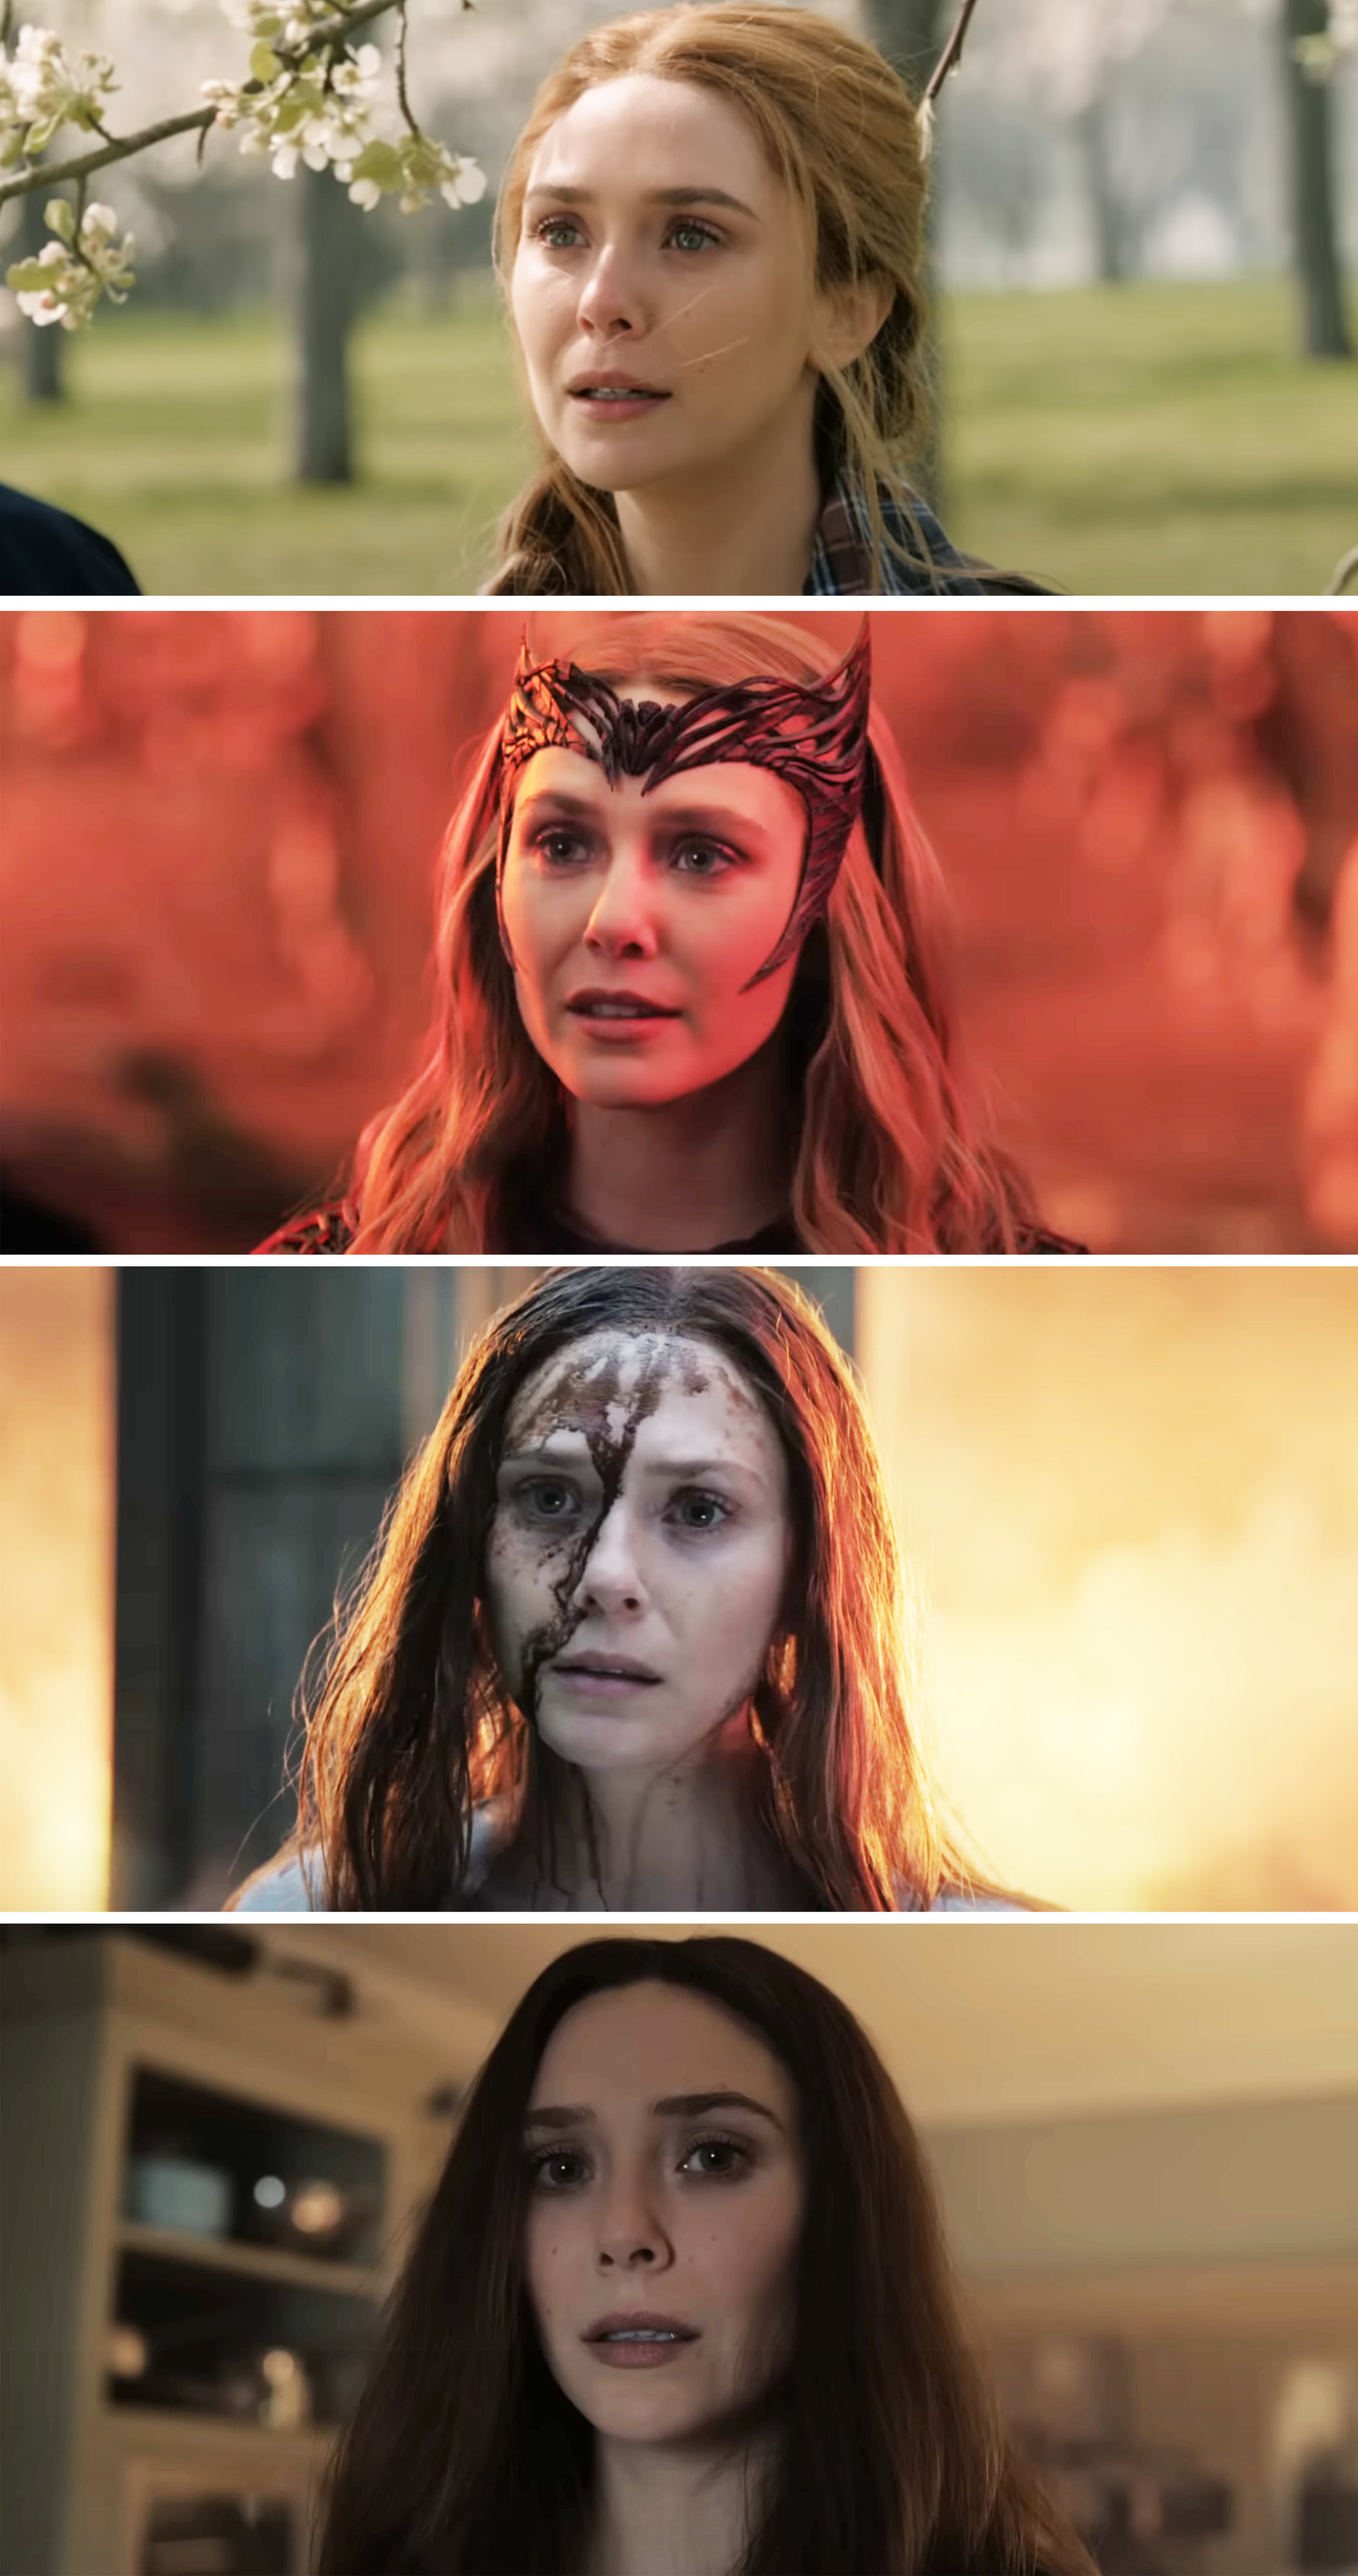 Four versions of Wanda, one normal, one as Scarlet Witch, one with blood covering half her face, and one with heavy makeup and darker hair